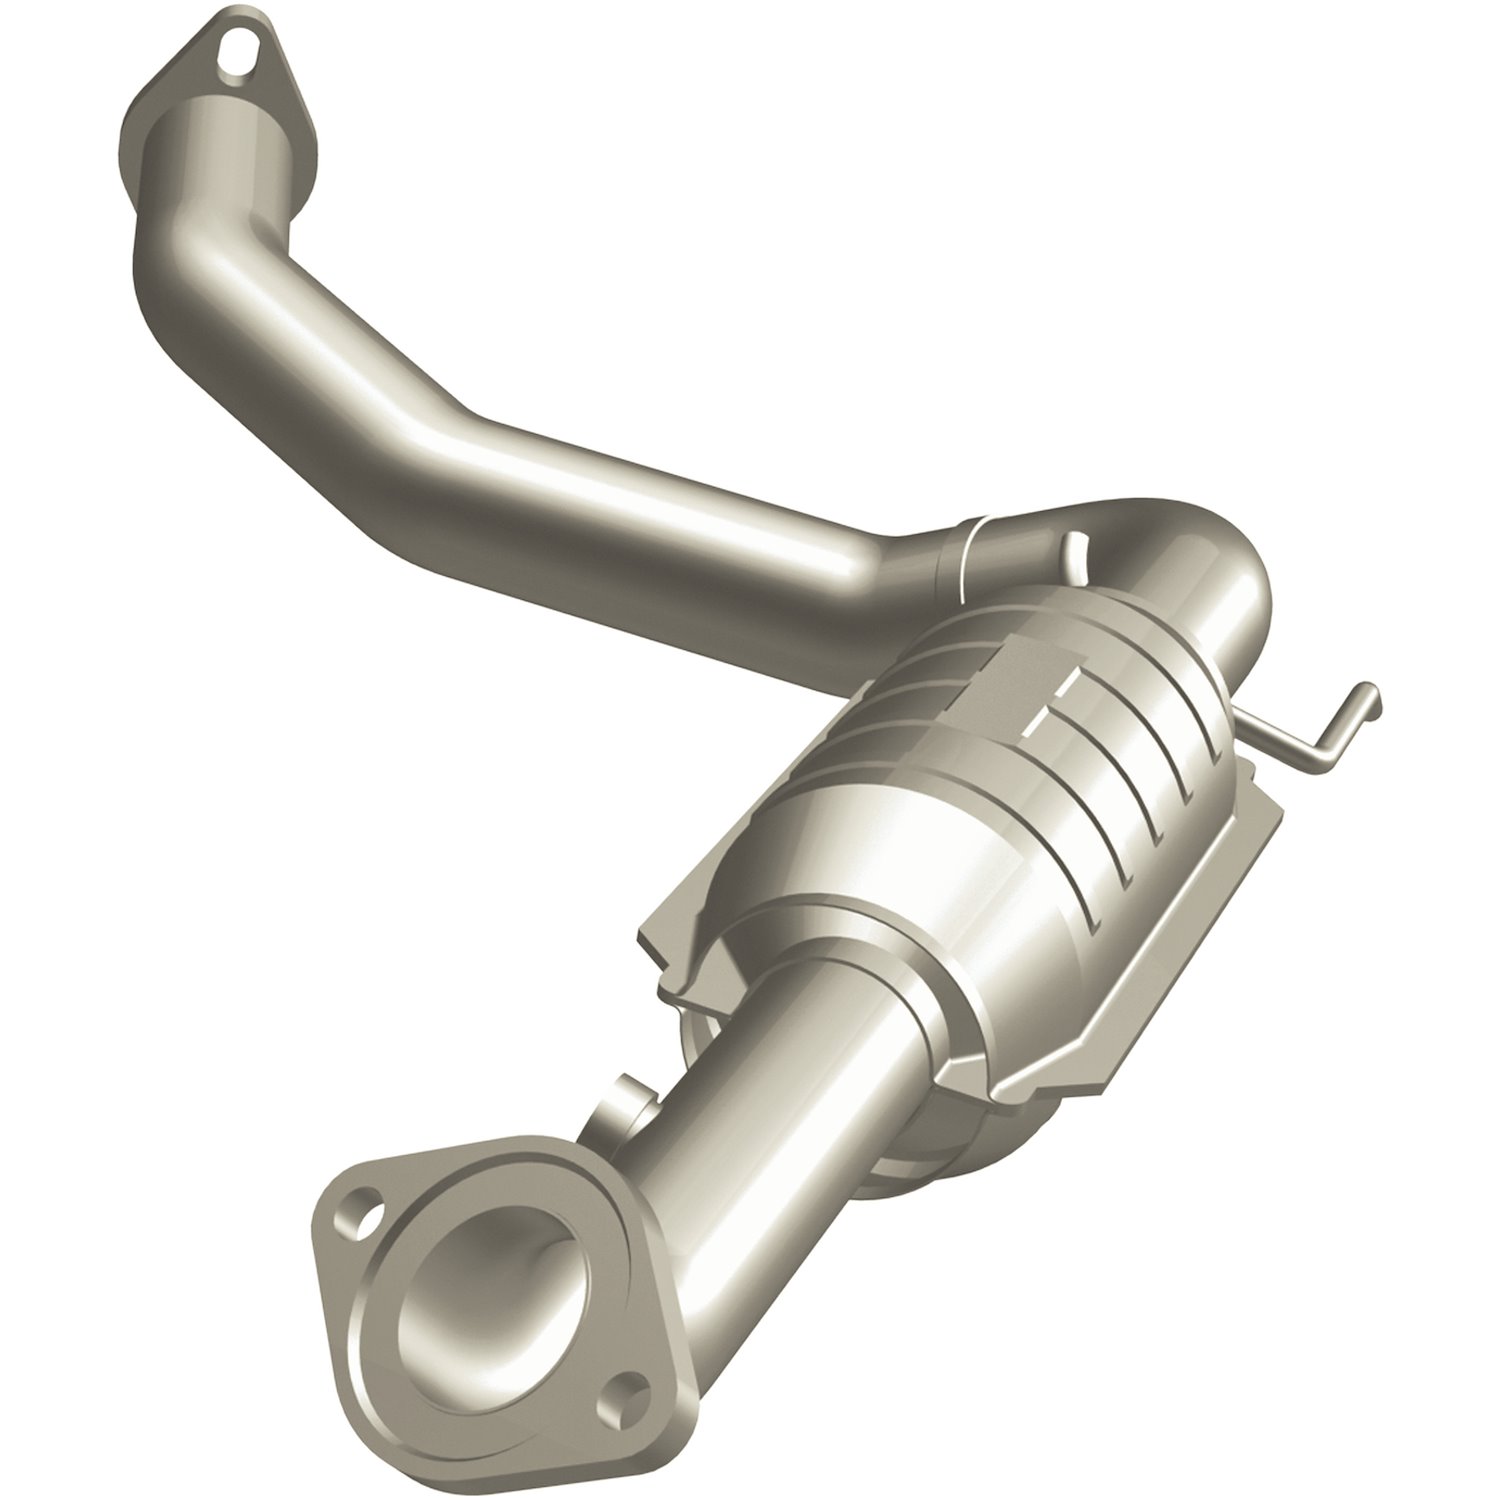 HM Grade Federal / EPA Compliant Direct-Fit Catalytic Converter 93656